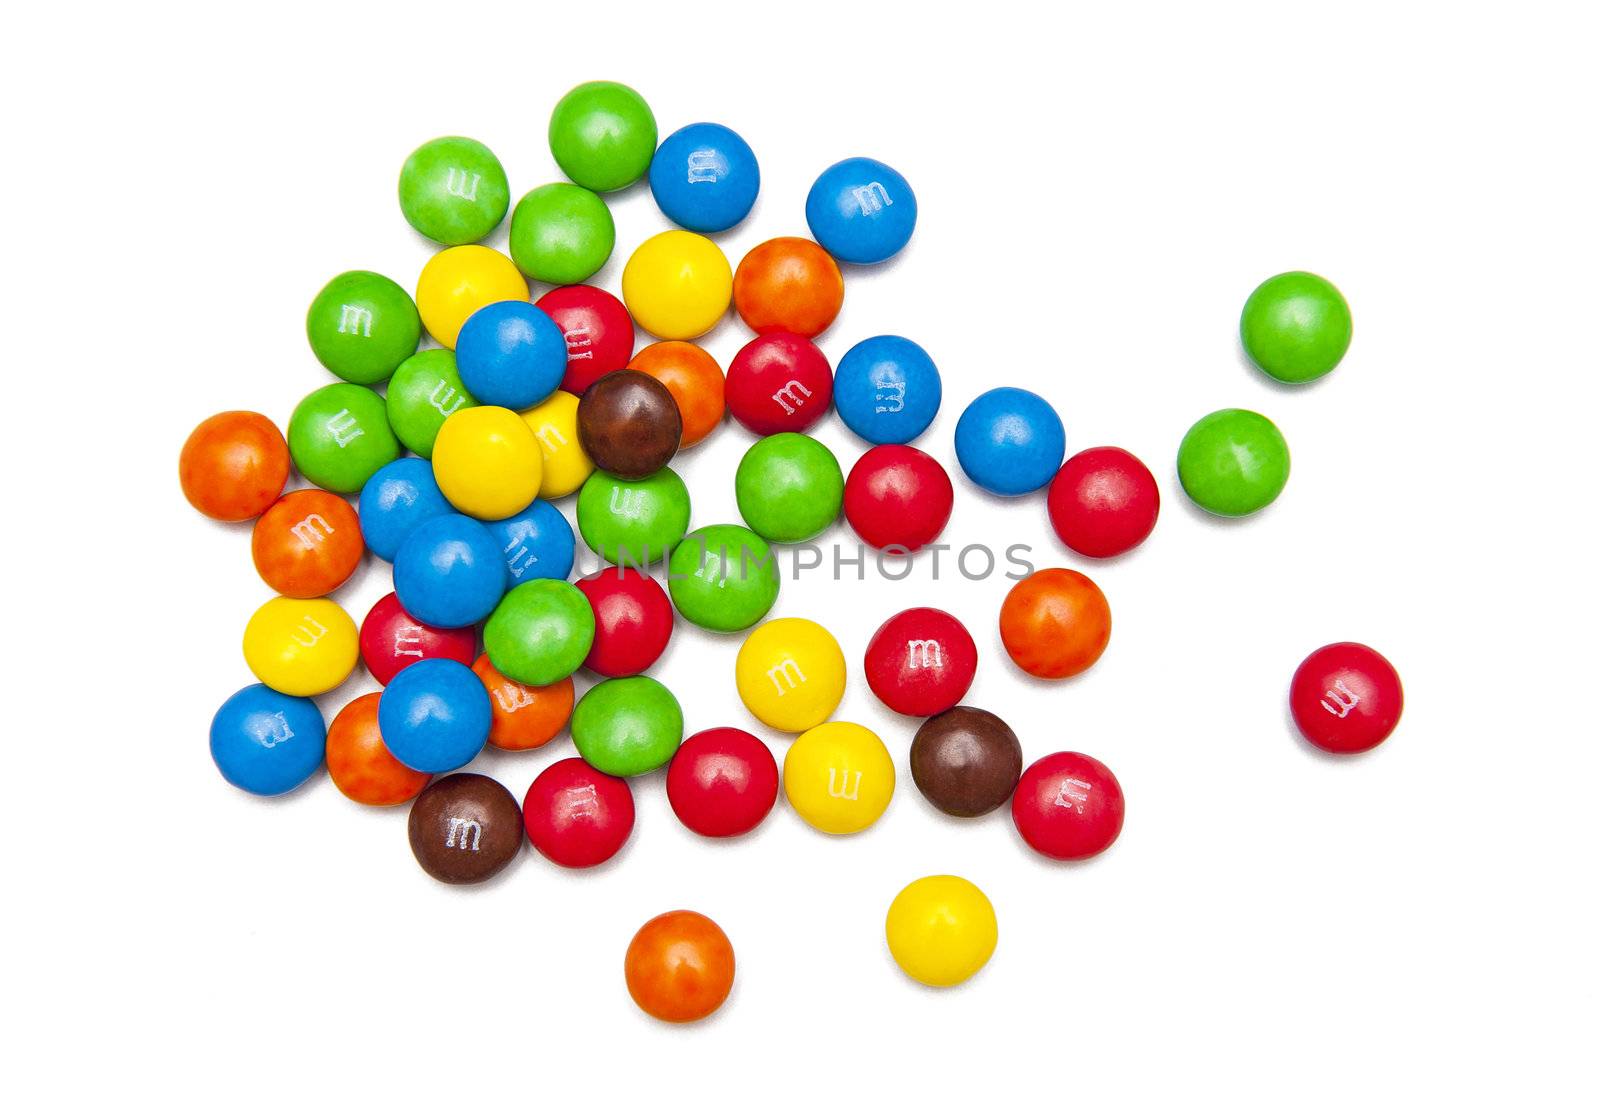 M&M colorful button-shaped candies isolated on the white background